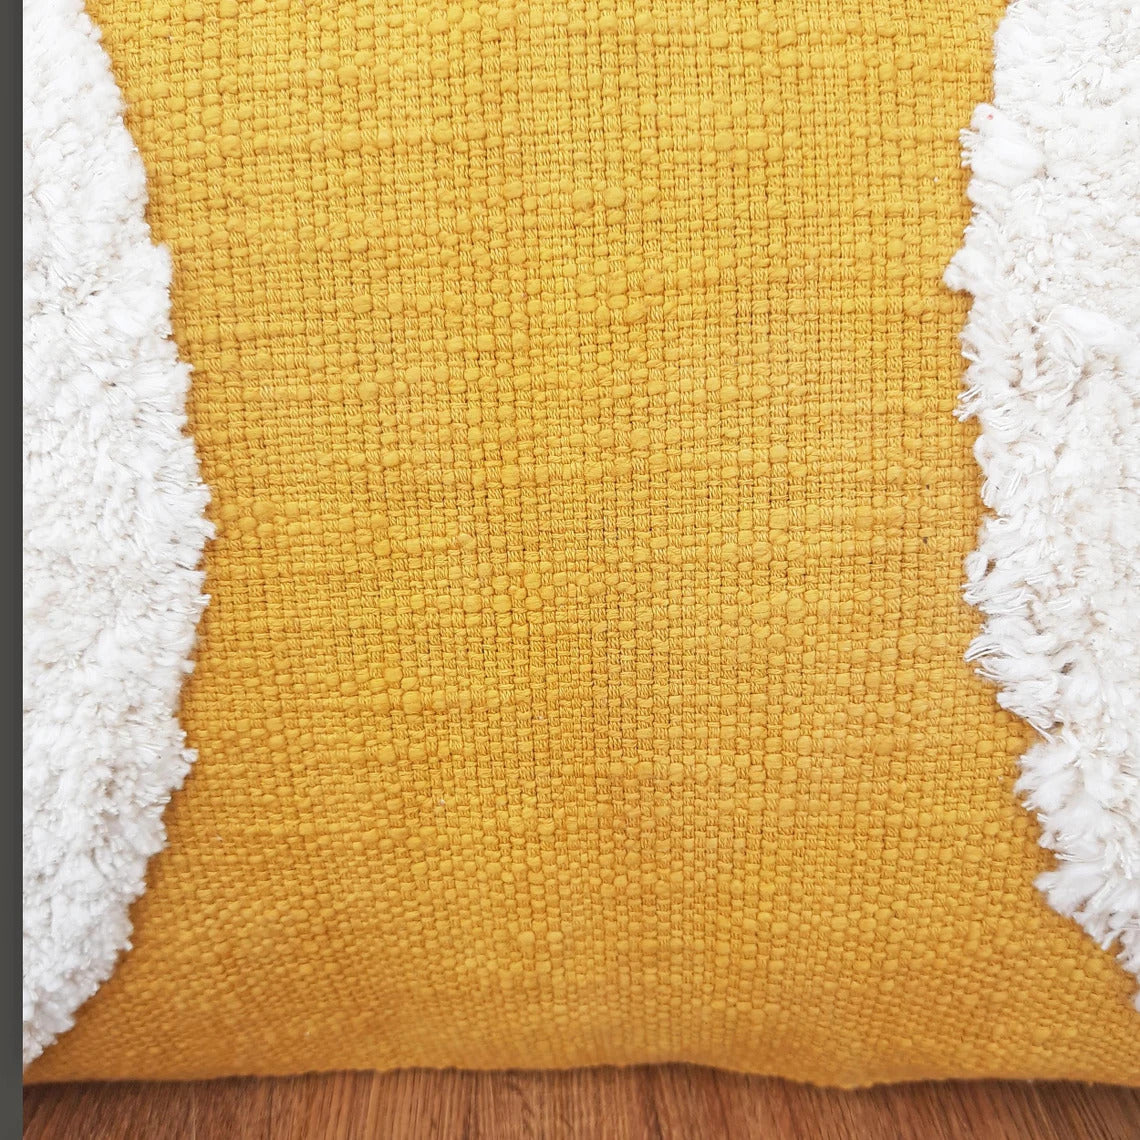 Mustard Yellow & Ivory Tufted Boho Textured Cotton cushion cover